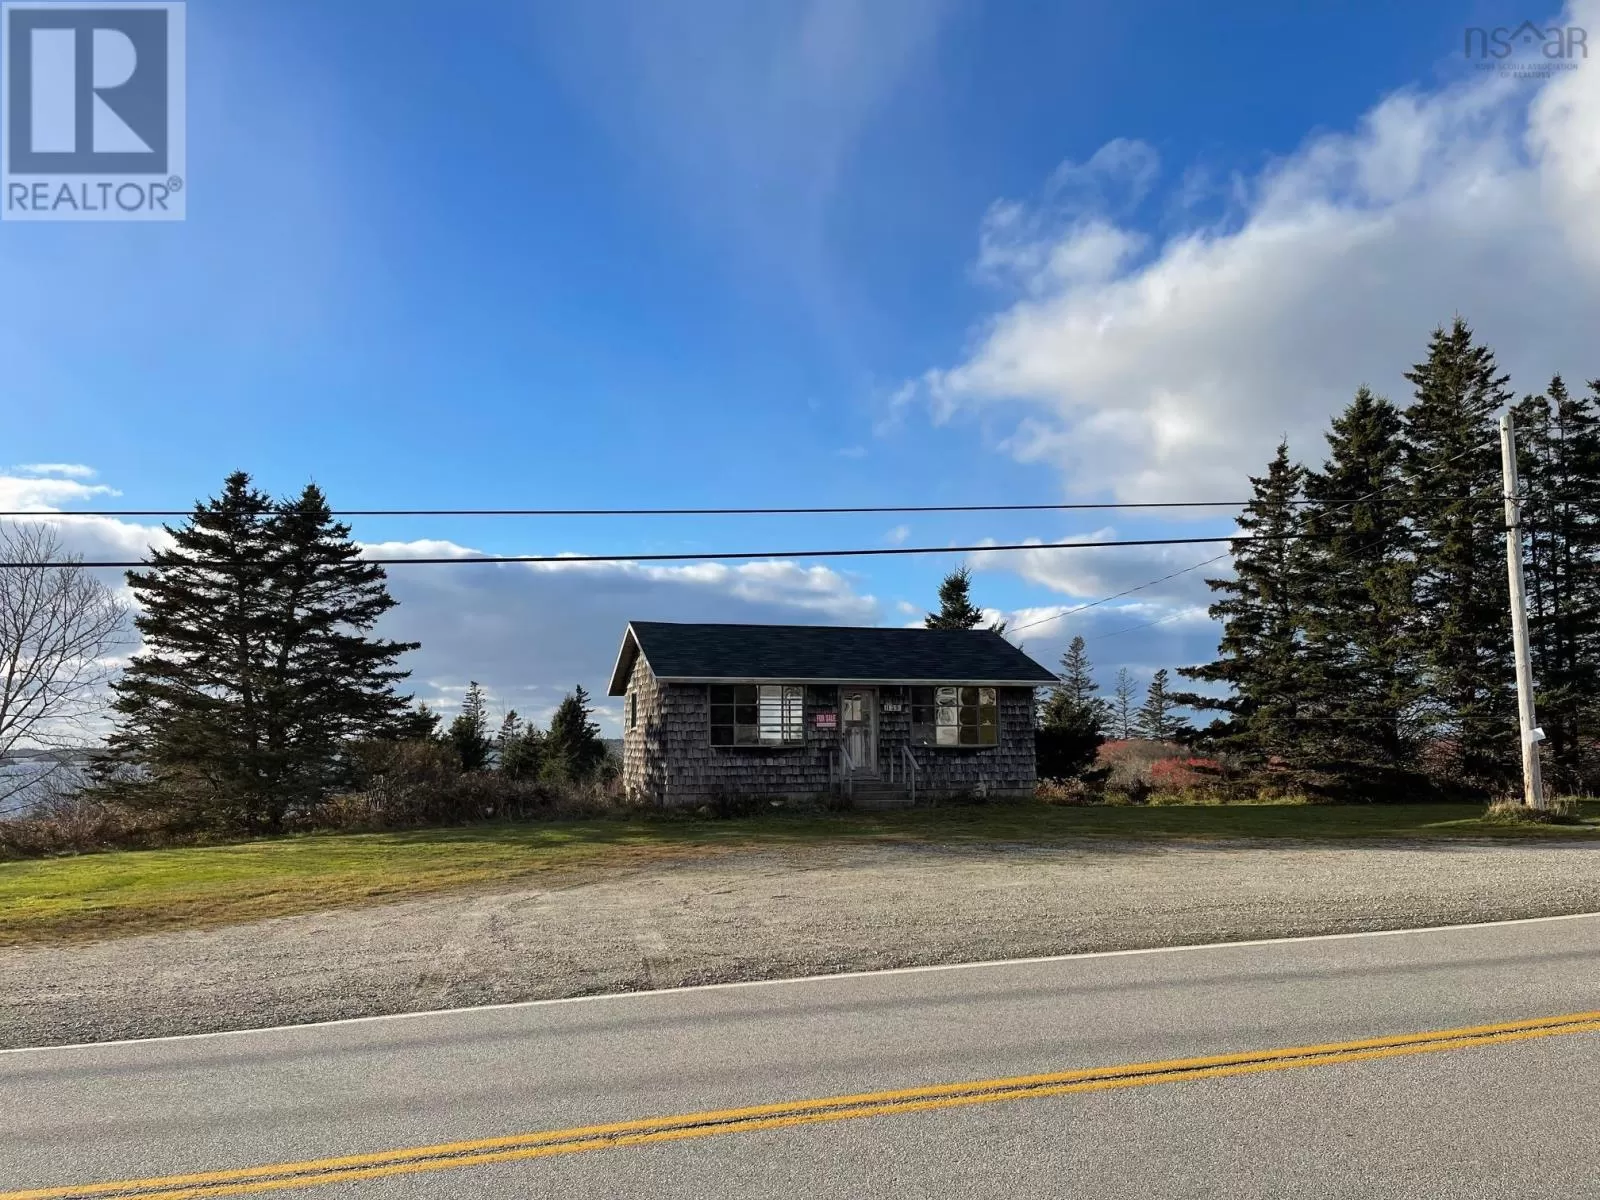 House for rent: 1139 Highway 3, Middle East Pubnico, Nova Scotia B0W 2A0